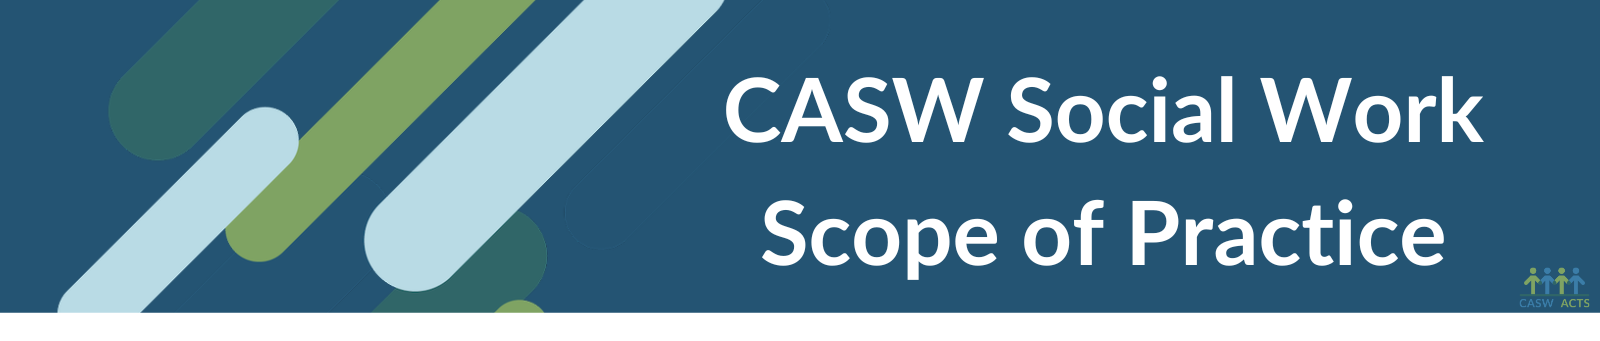 CASW Social Work Scope of Practice | Canadian Association of Social Workers